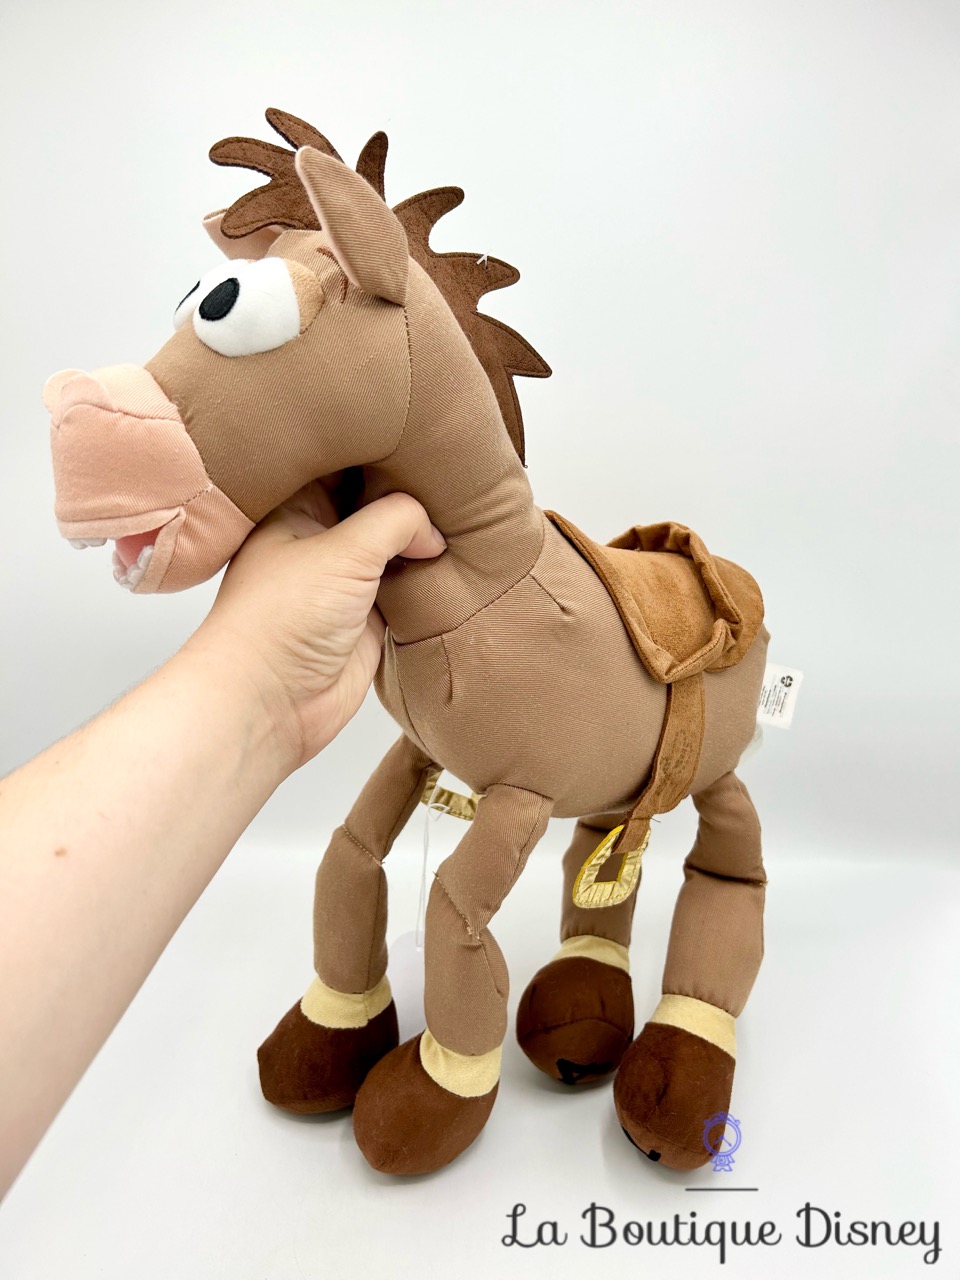 peluche-pile-poil-cheval-toy-story-disney-store-écusson-grand-format-2